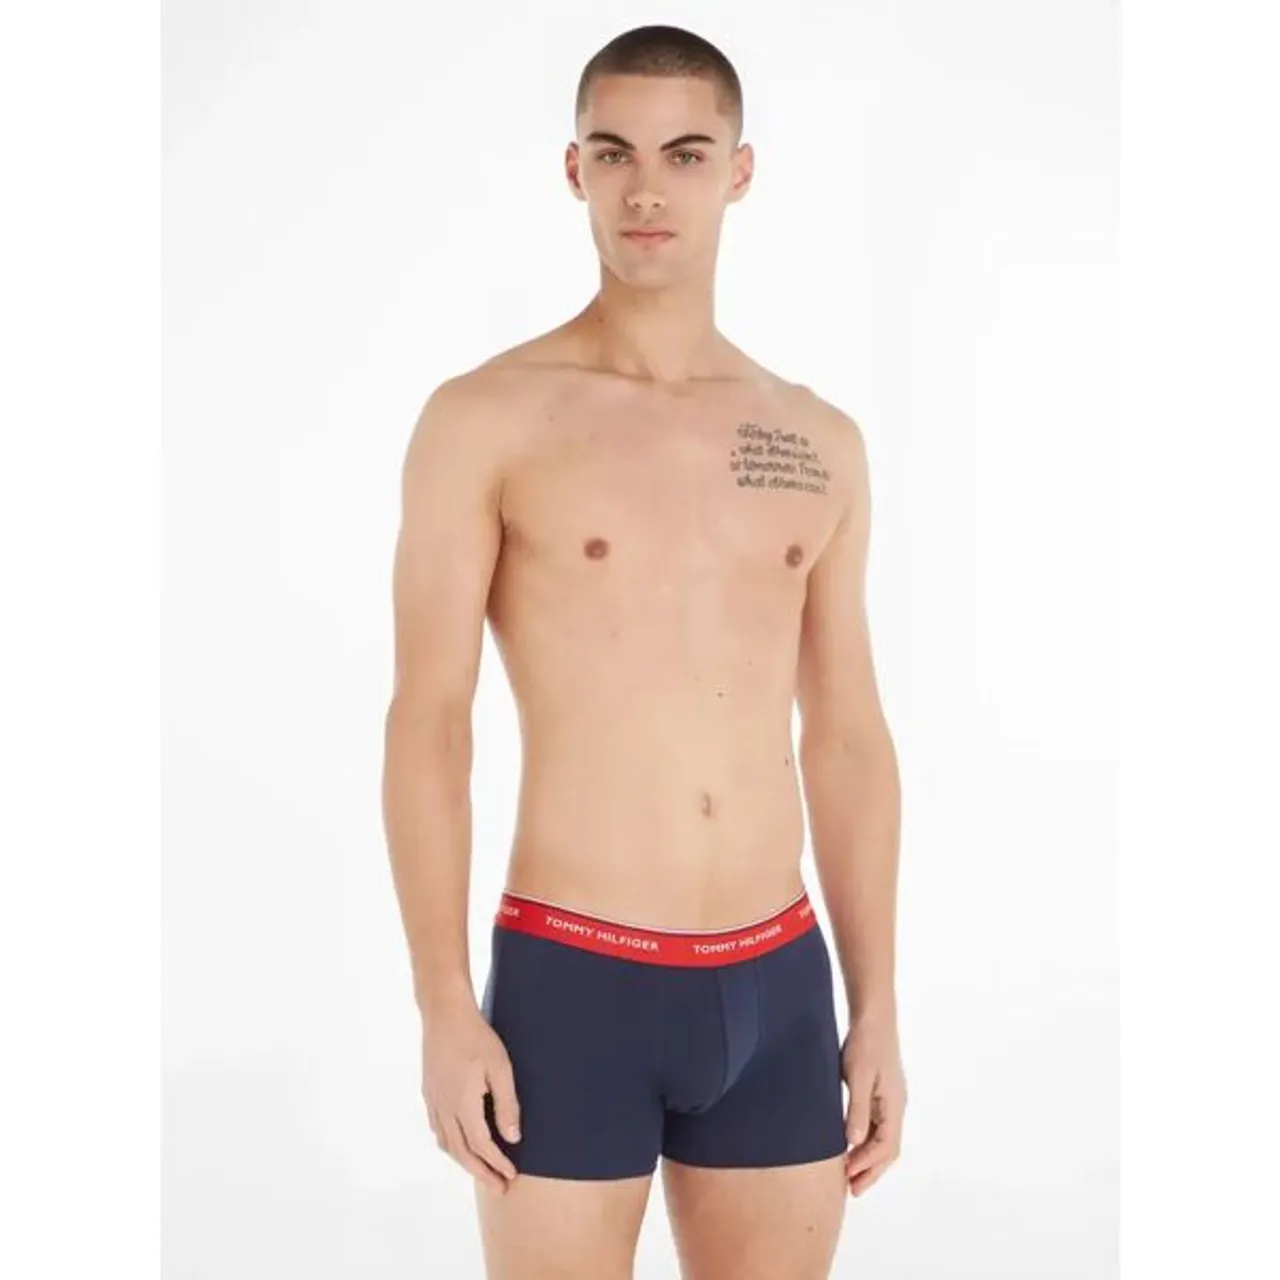 Tommy Hilfiger Cotton Jersey Trunks, Pack of 3, Multi/Peacoat - Multi/Peacoat - Male